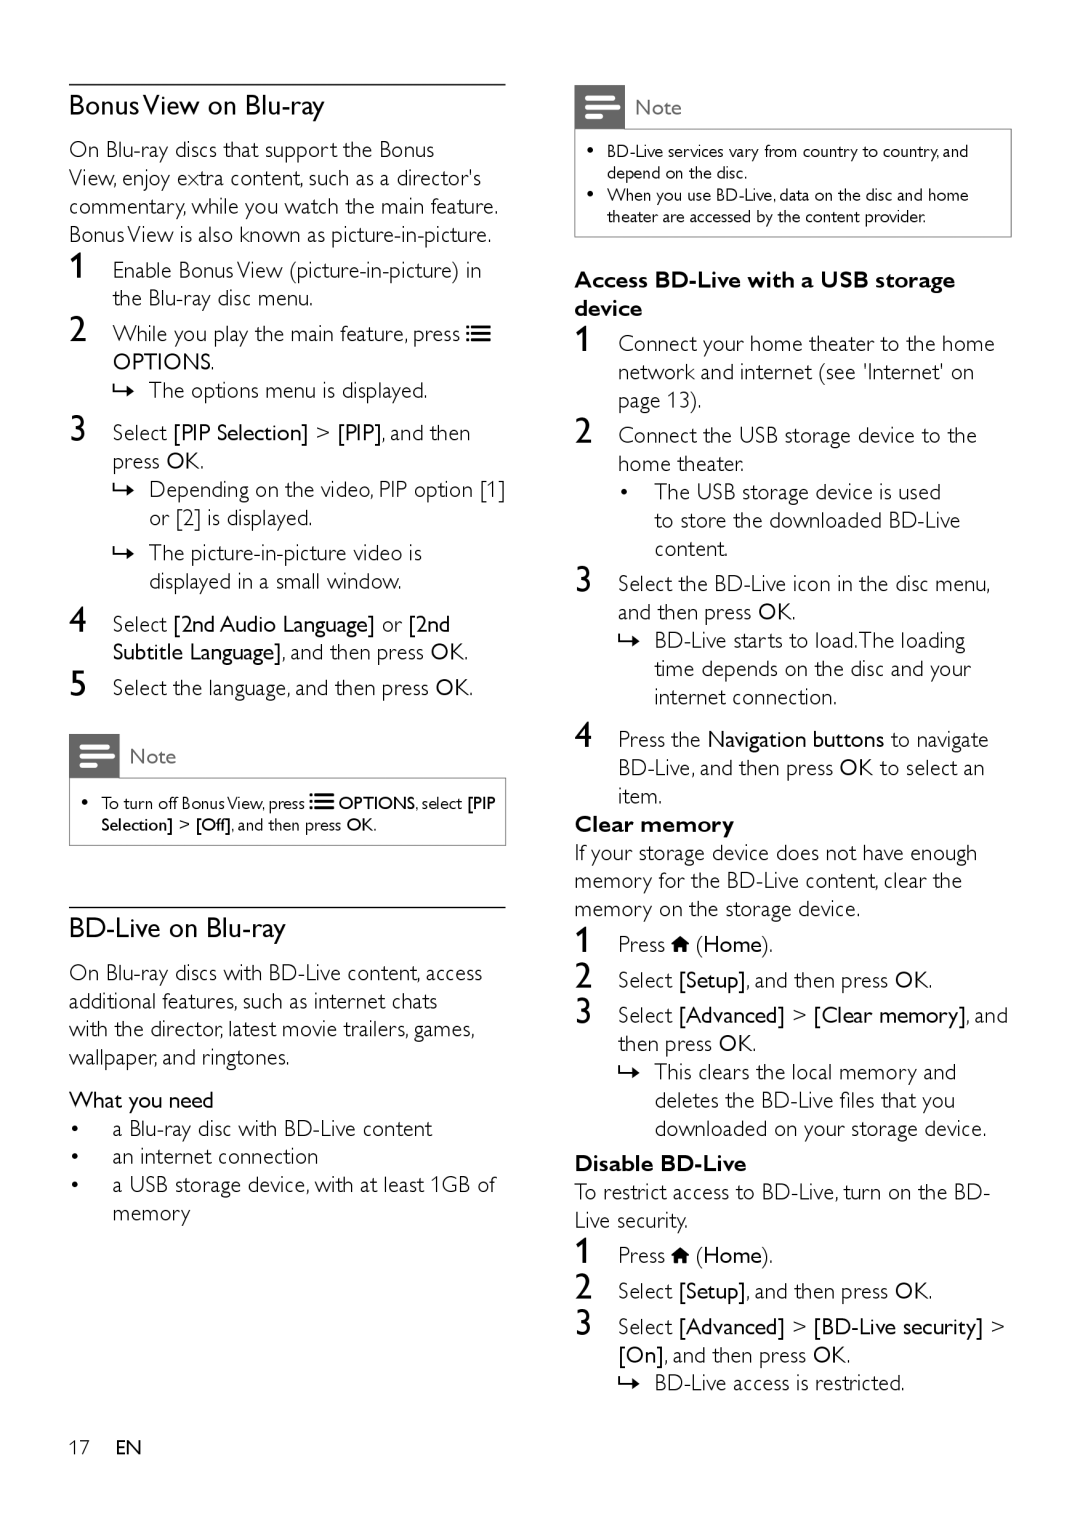 Philips HTS3541 user manual Bonus View on Blu-ray, BD-Liveon Blu-ray, Access BD-Livewith a USB storage device, Clear memory 